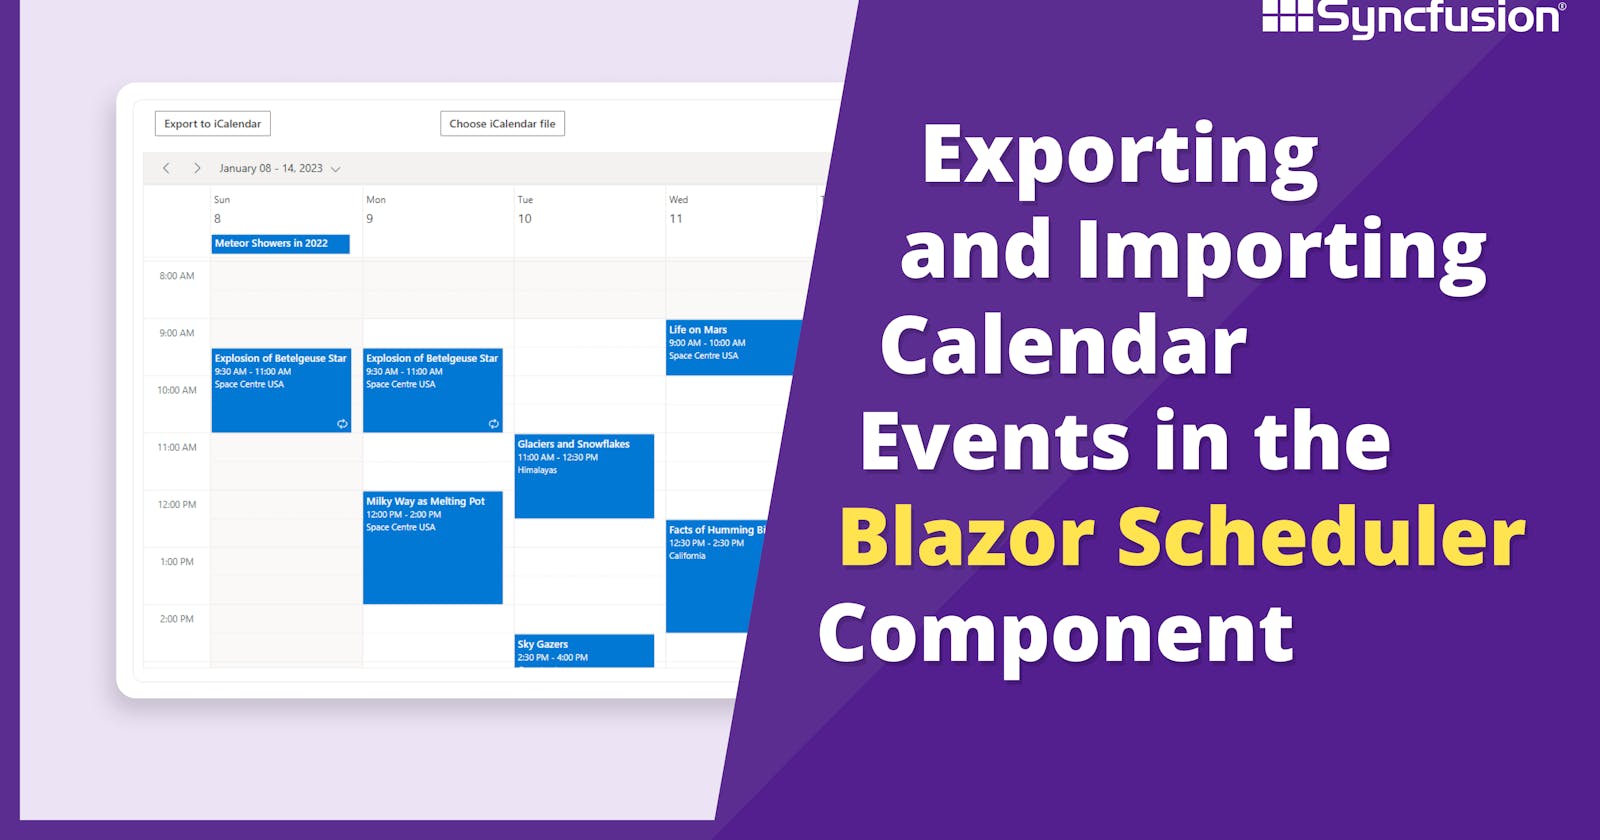 Exporting and Importing Calendar Events in Blazor Scheduler Component